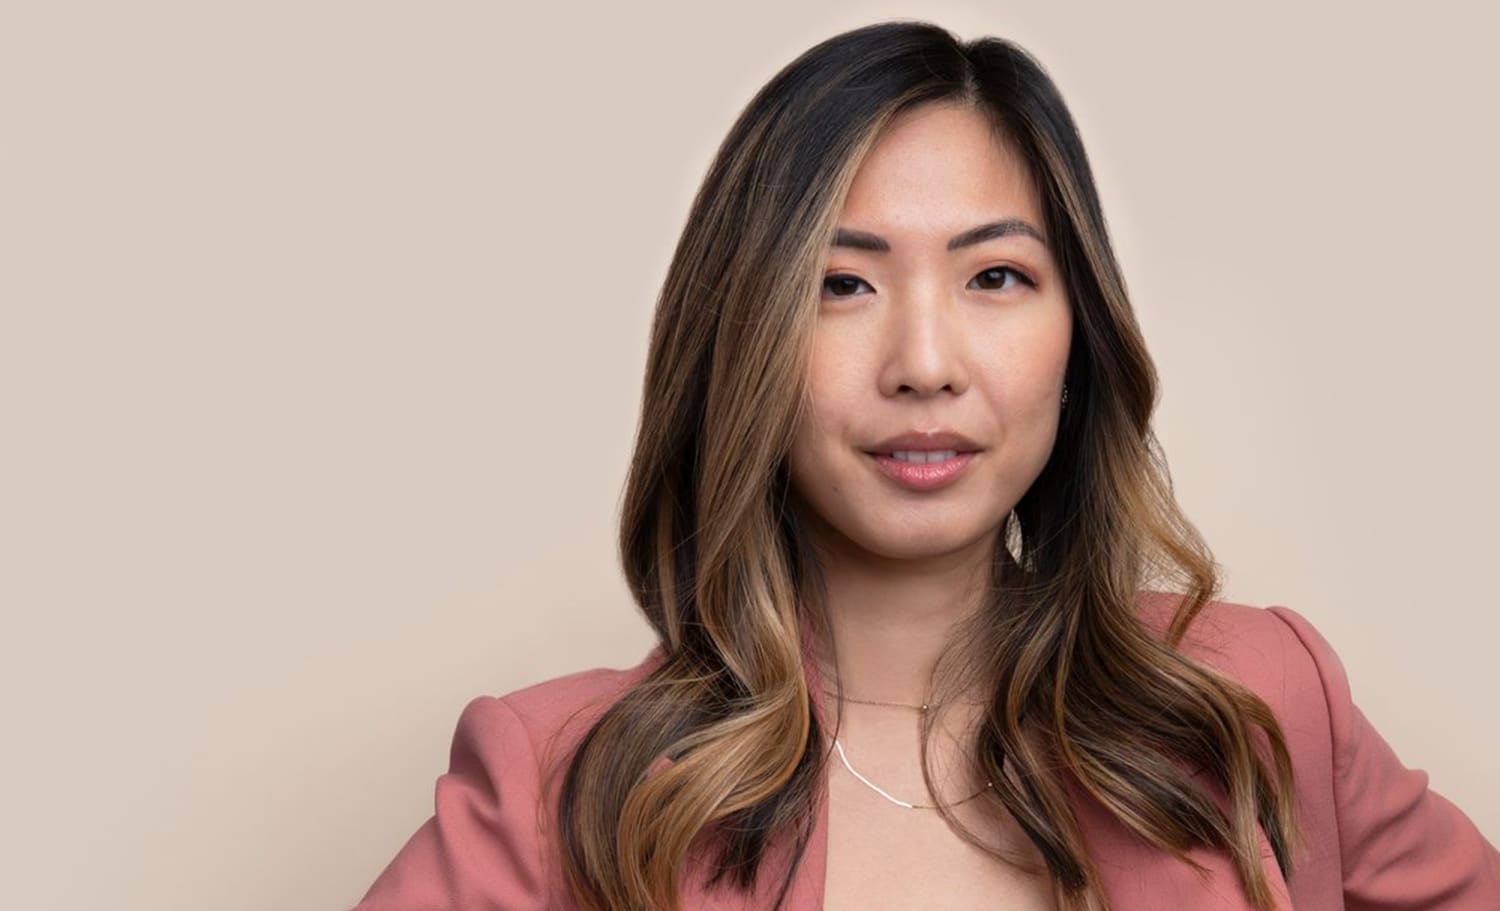 Founder Of Pepper: Jaclyn Fu Creates Limitless Comfort